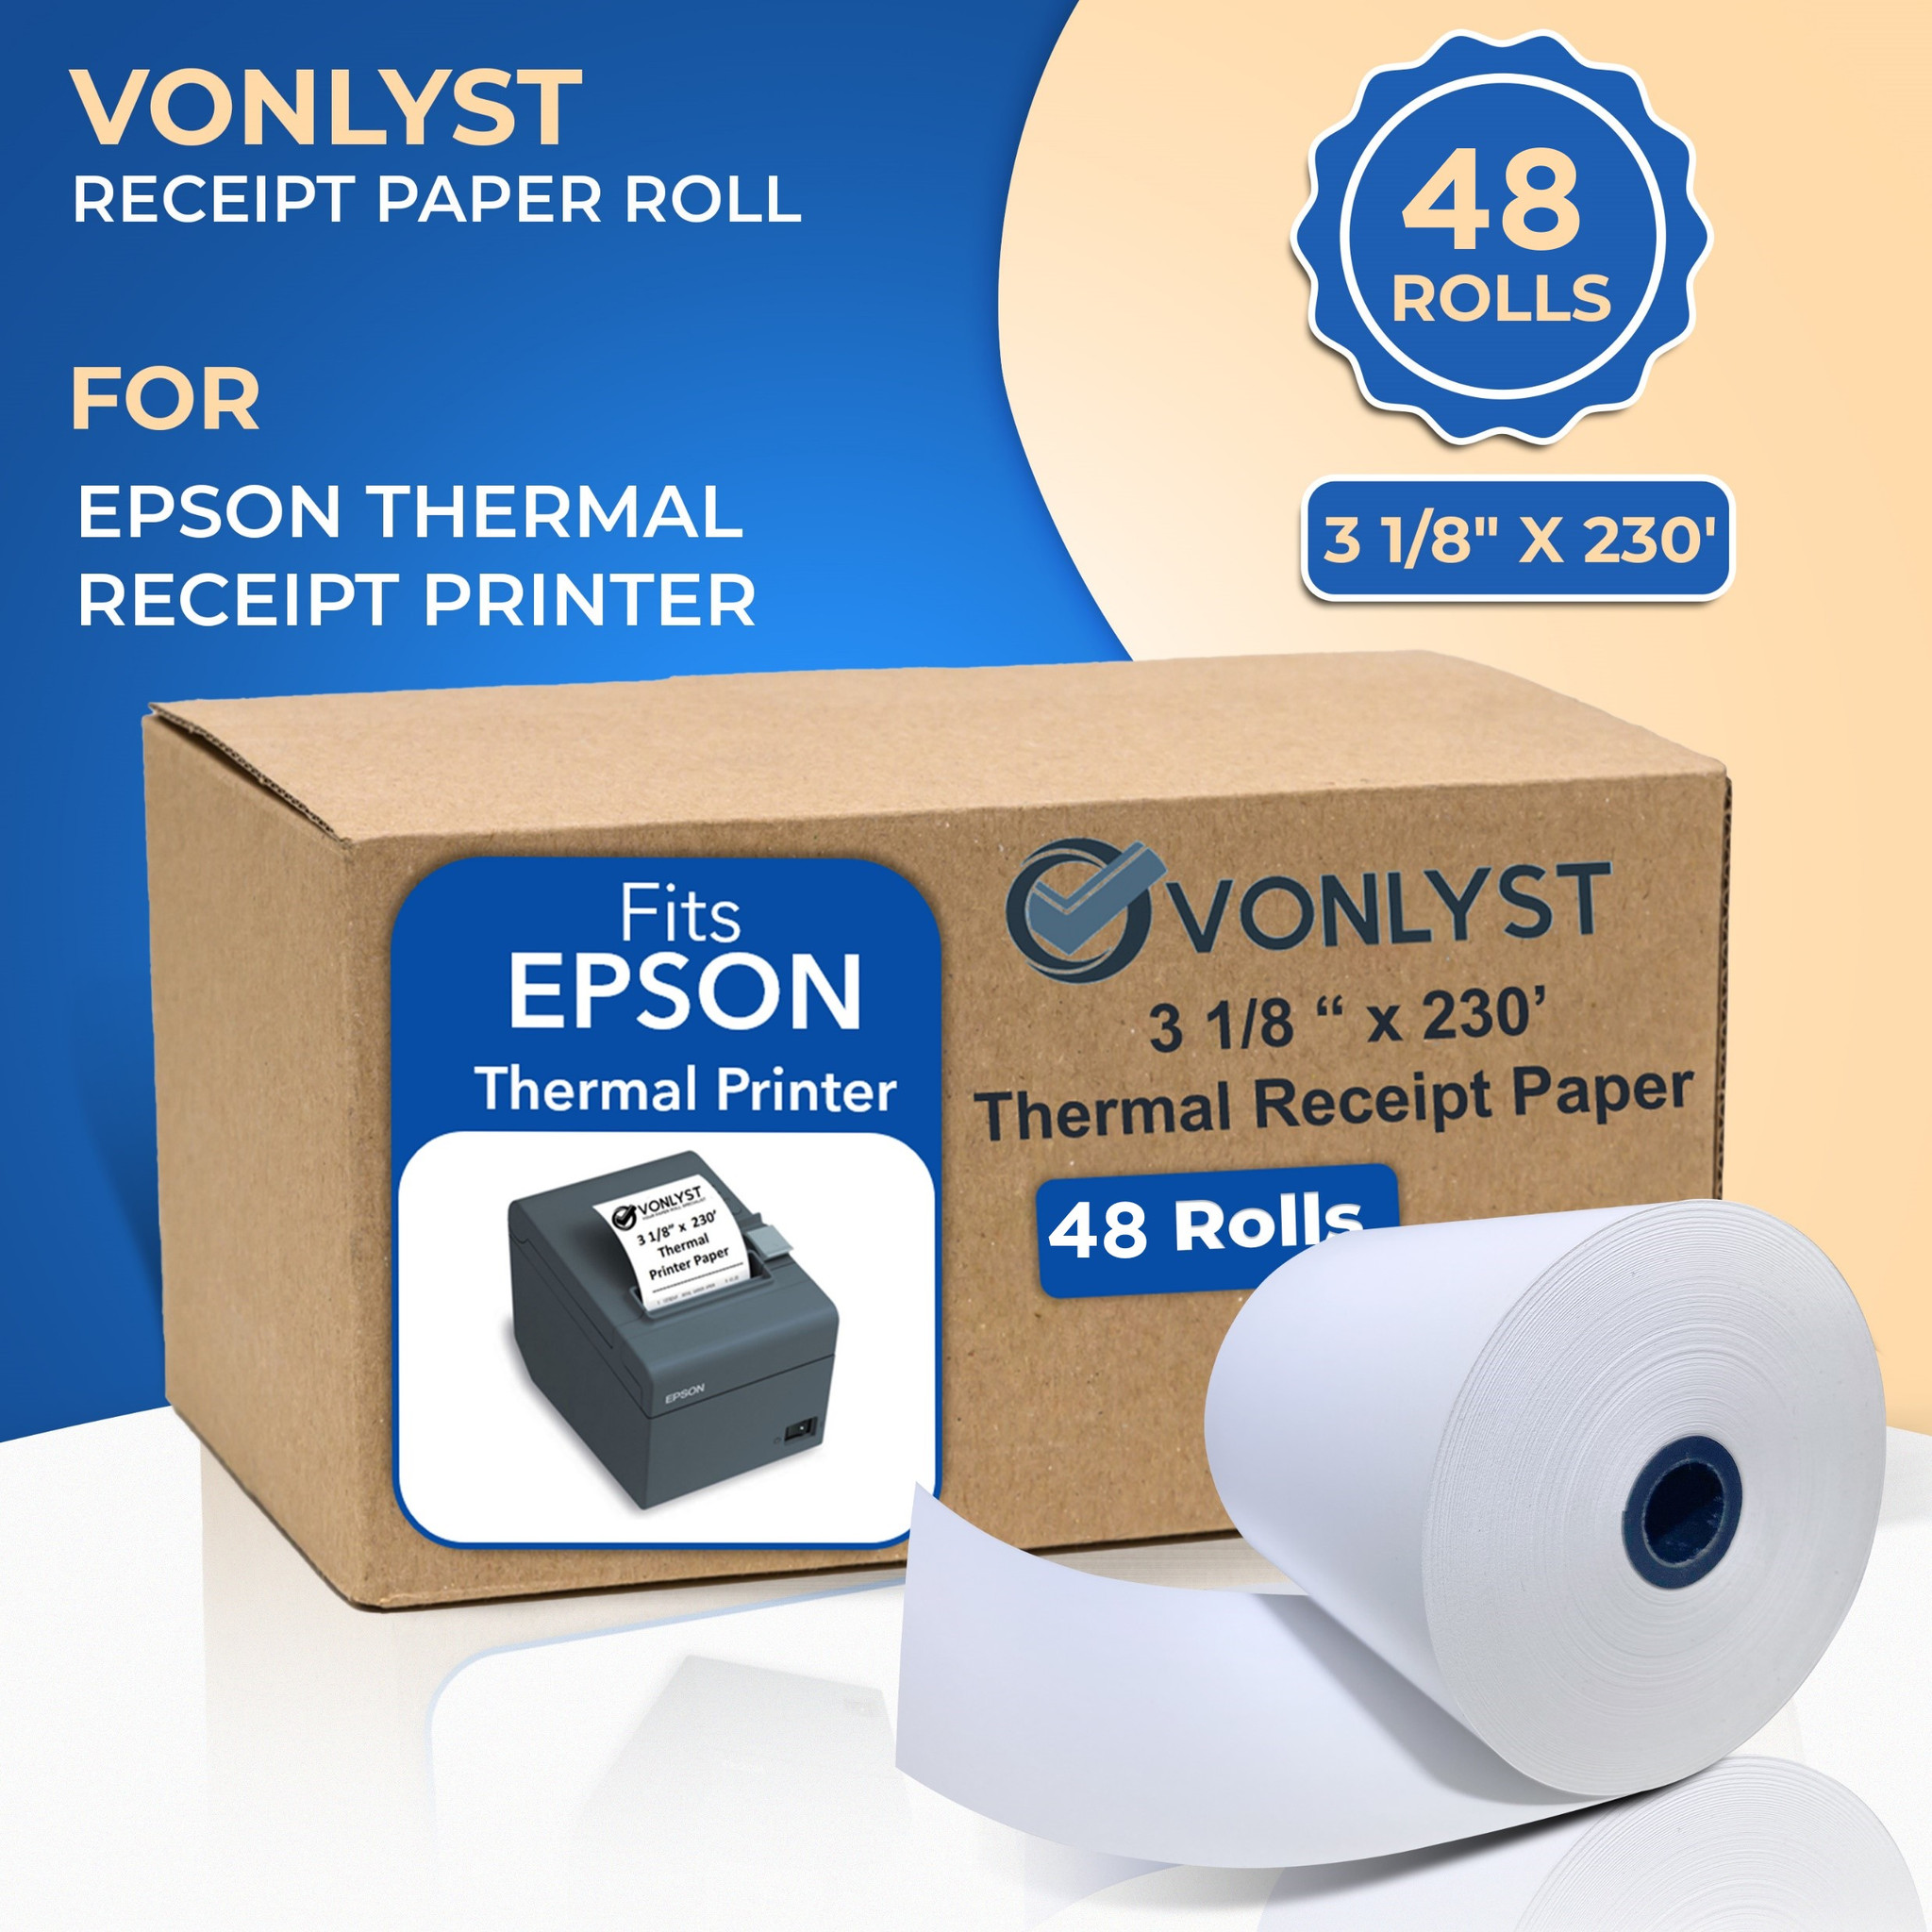 Epson Thermal Receipt Paper roll 3 1 8' x with 48 - Vonlyst